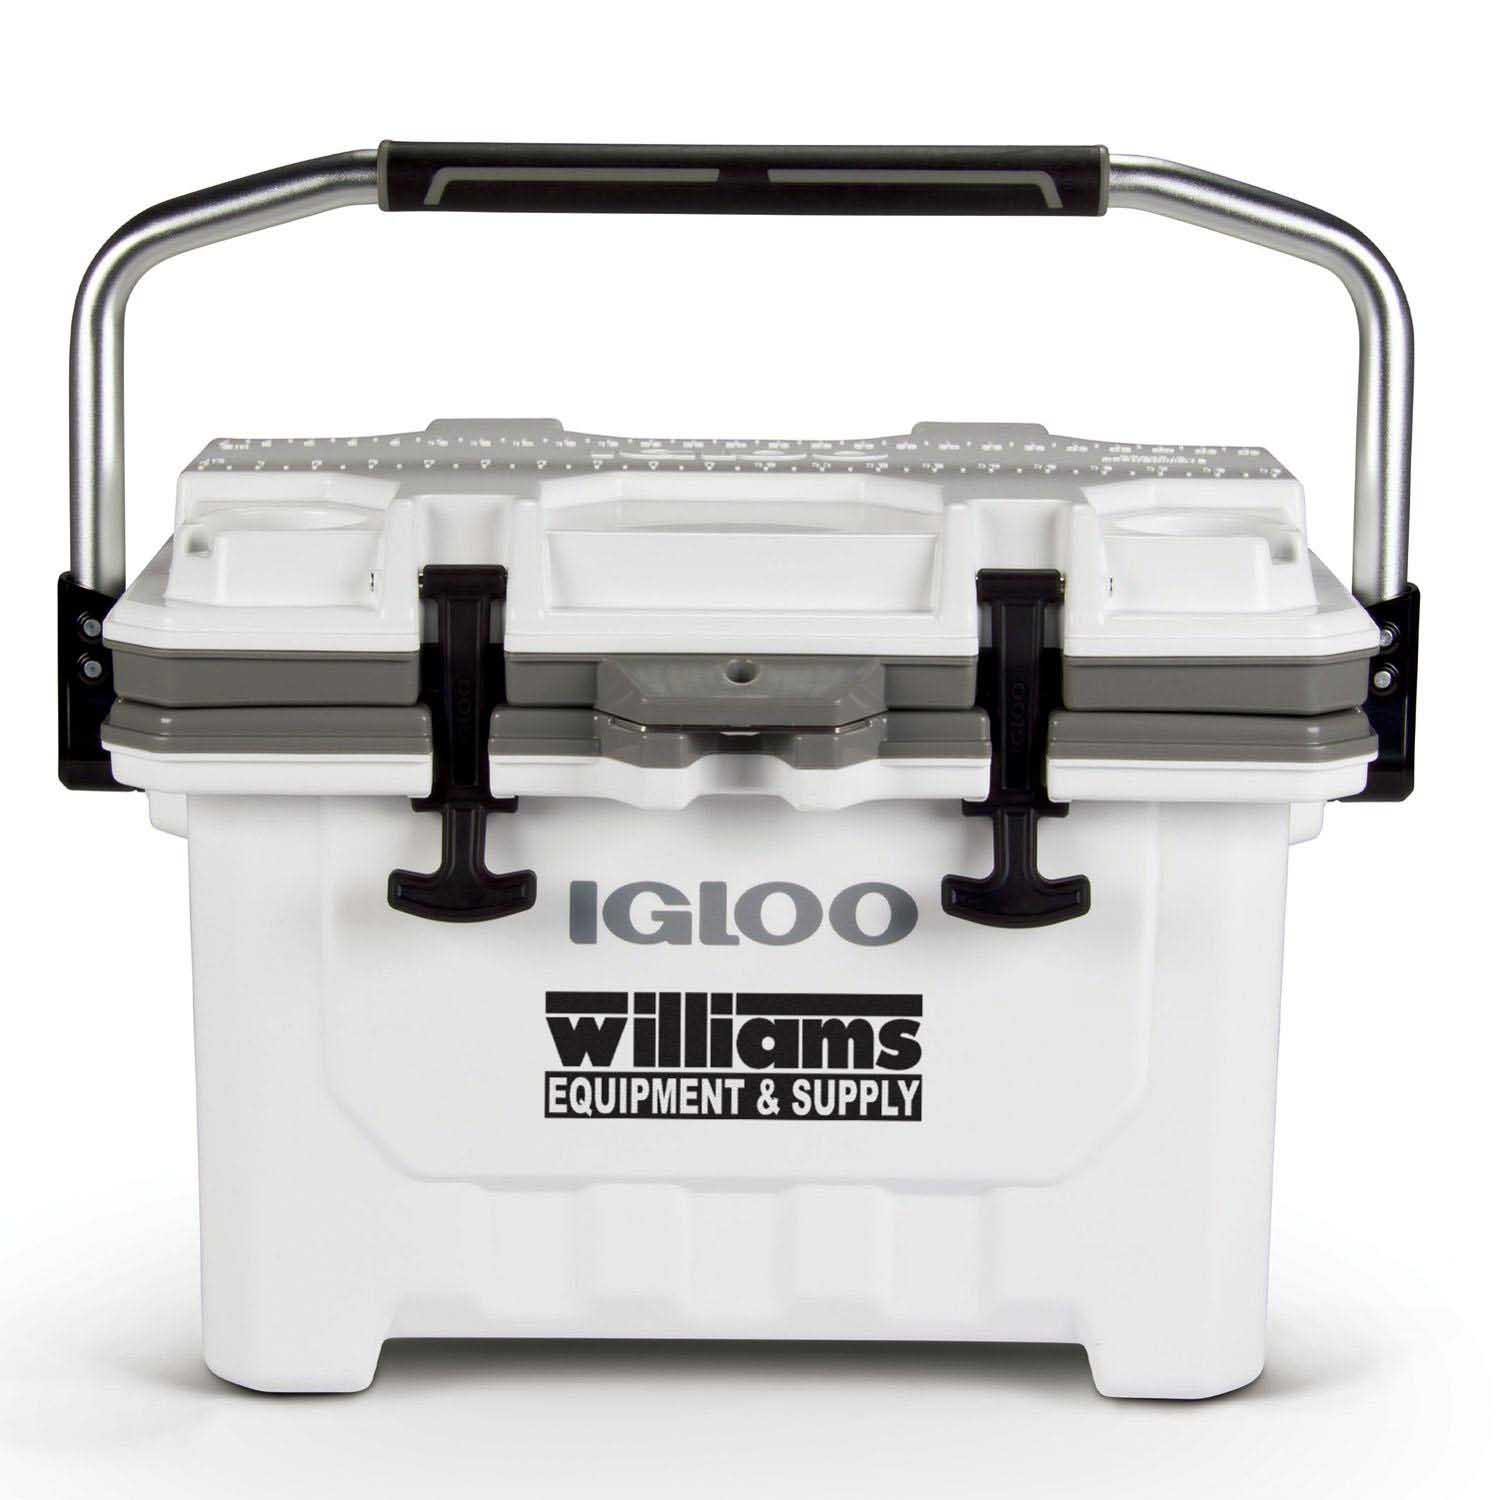 Igloo And Rubbermaid Coolersigimx24 24 Qt Imx Cooler